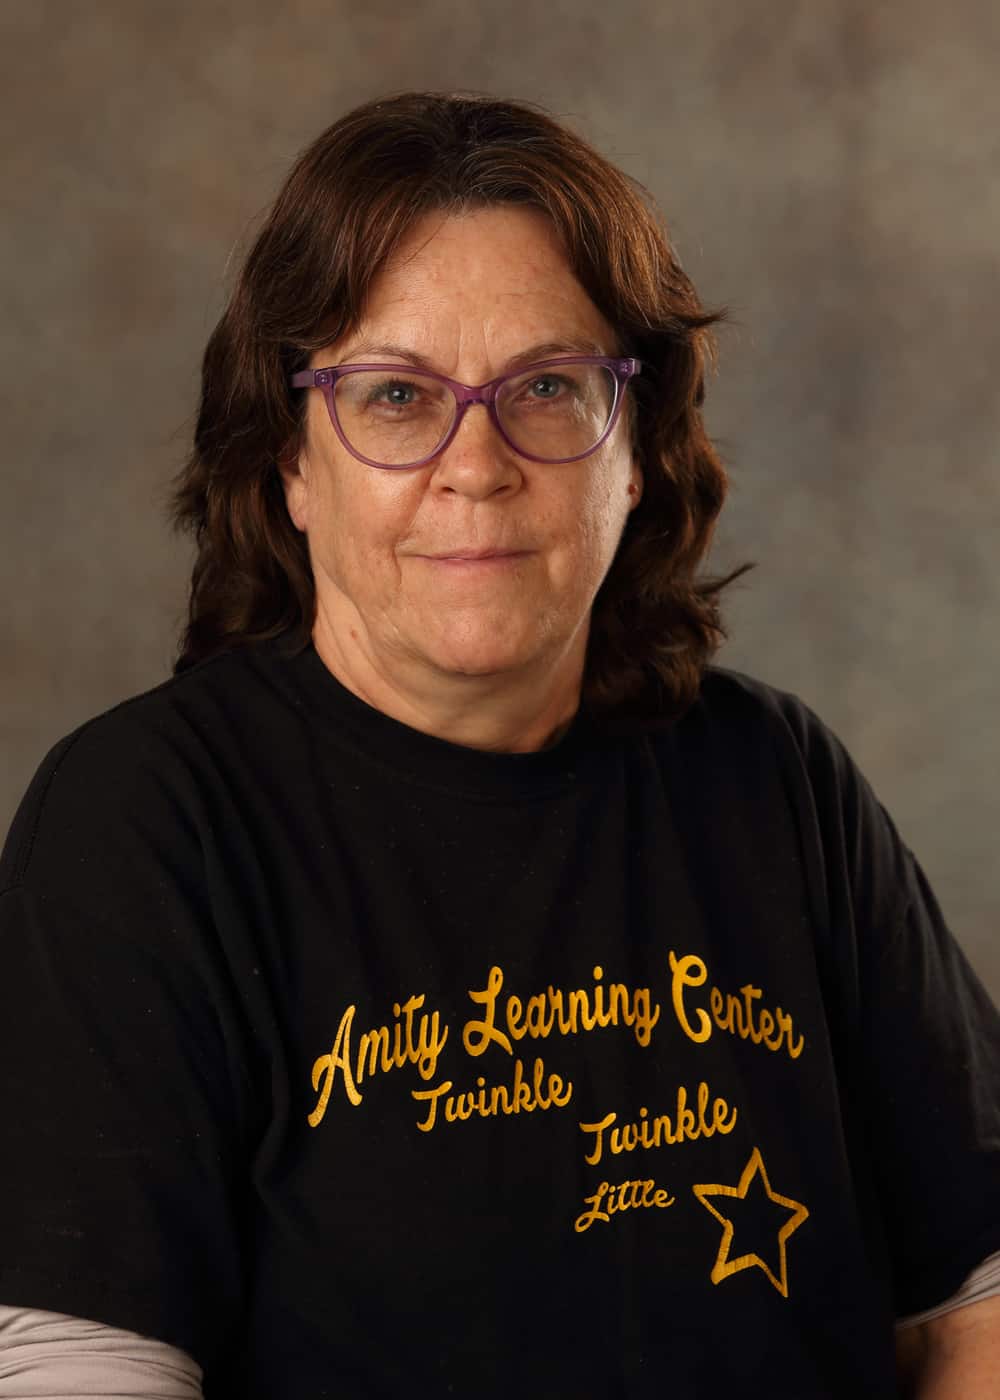 Photo of Kitchen Manager Rhonda Mashaw. She is a Caucasian woman with long dark brown hair, light blue eyes, and glasses with purple frames. She is wearing a black Amity Learning Center T-shirt with yellow lettering.